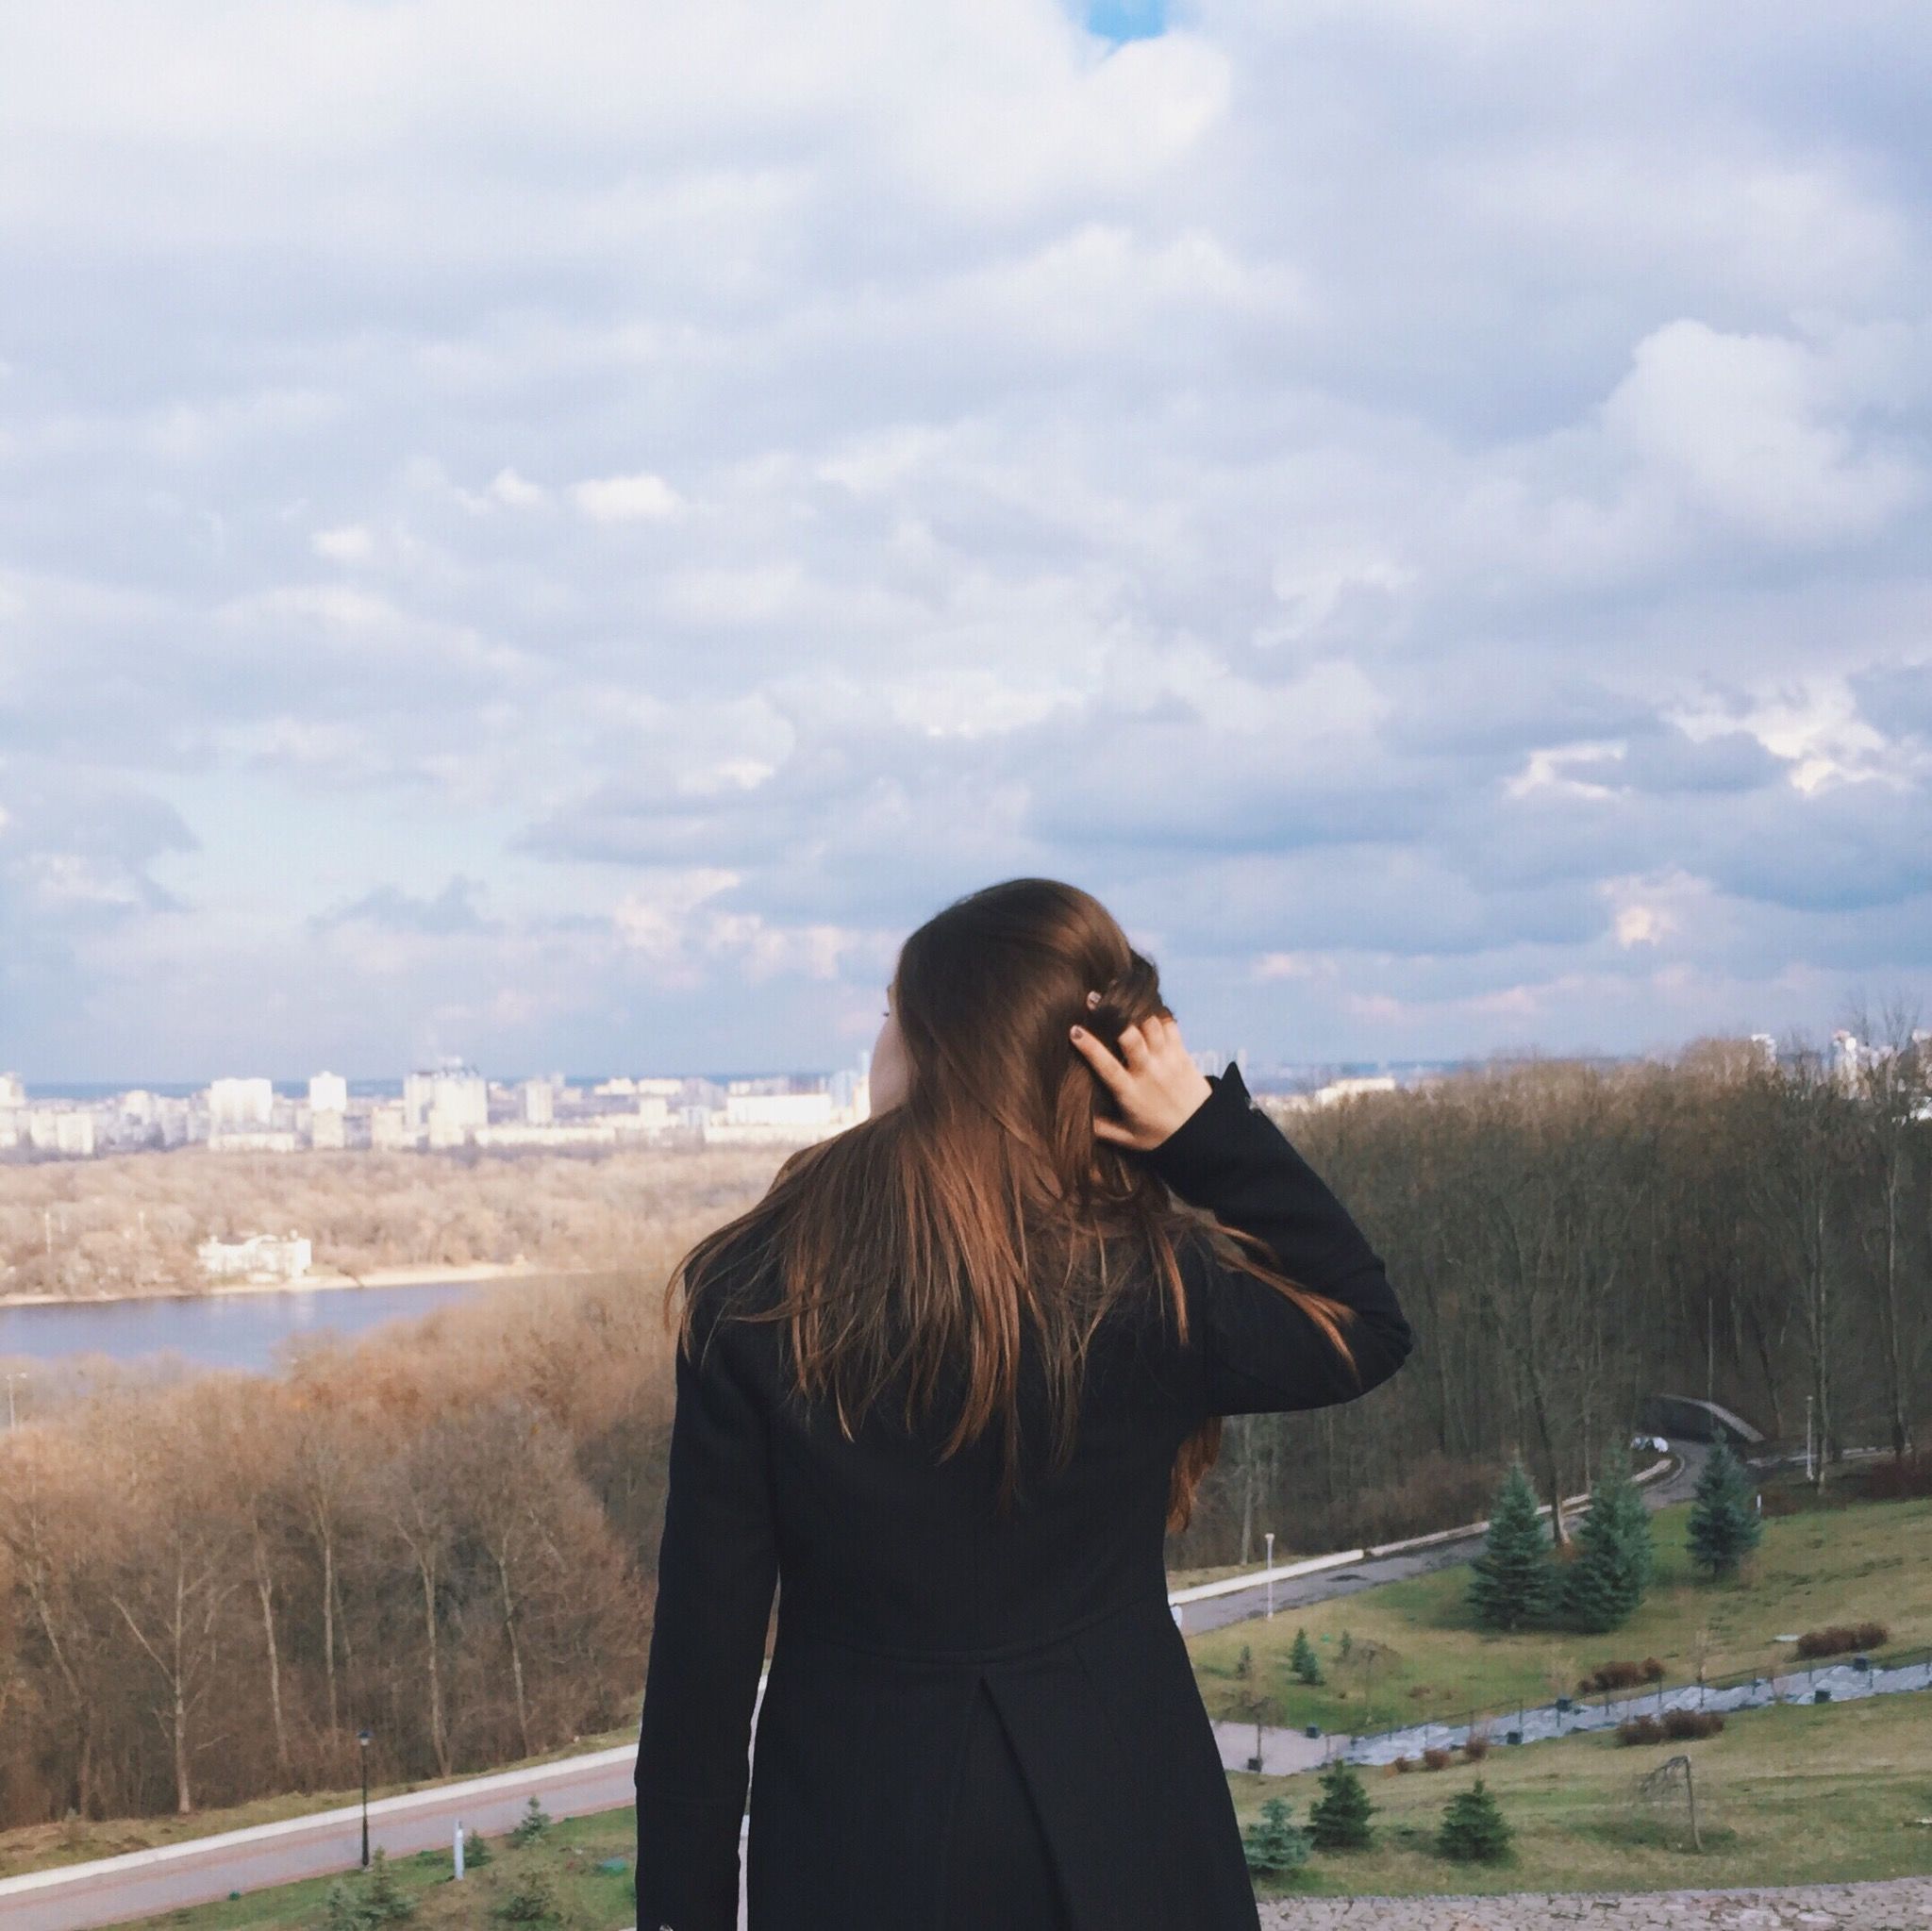 lifestyles, sky, young adult, waist up, leisure activity, standing, casual clothing, long hair, rear view, young women, field, three quarter length, person, brown hair, cloud - sky, landscape, focus on foreground, nature